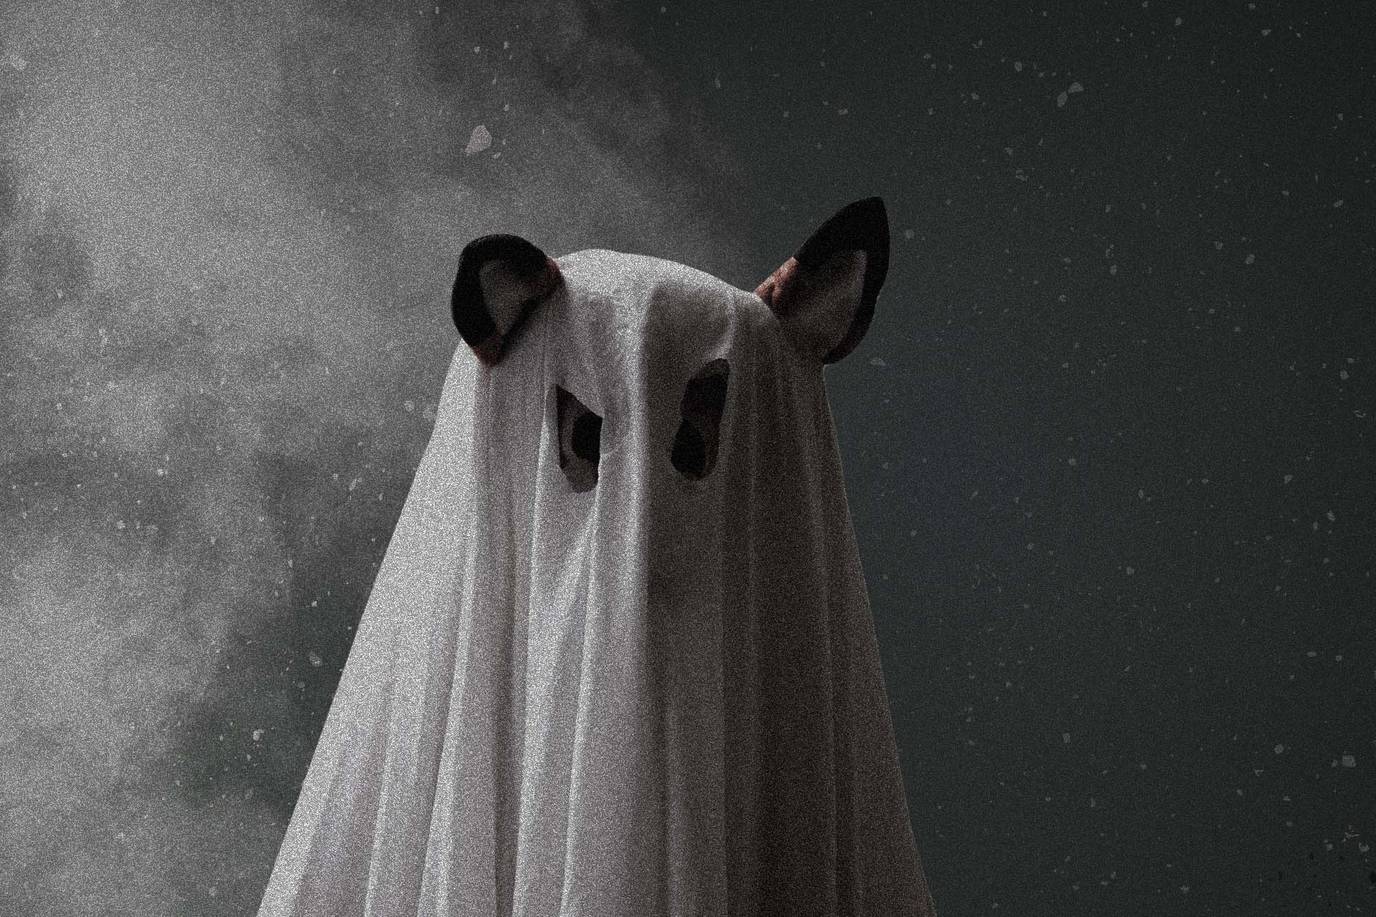 The Rollins fox mascot dressed as a classic sheet ghost